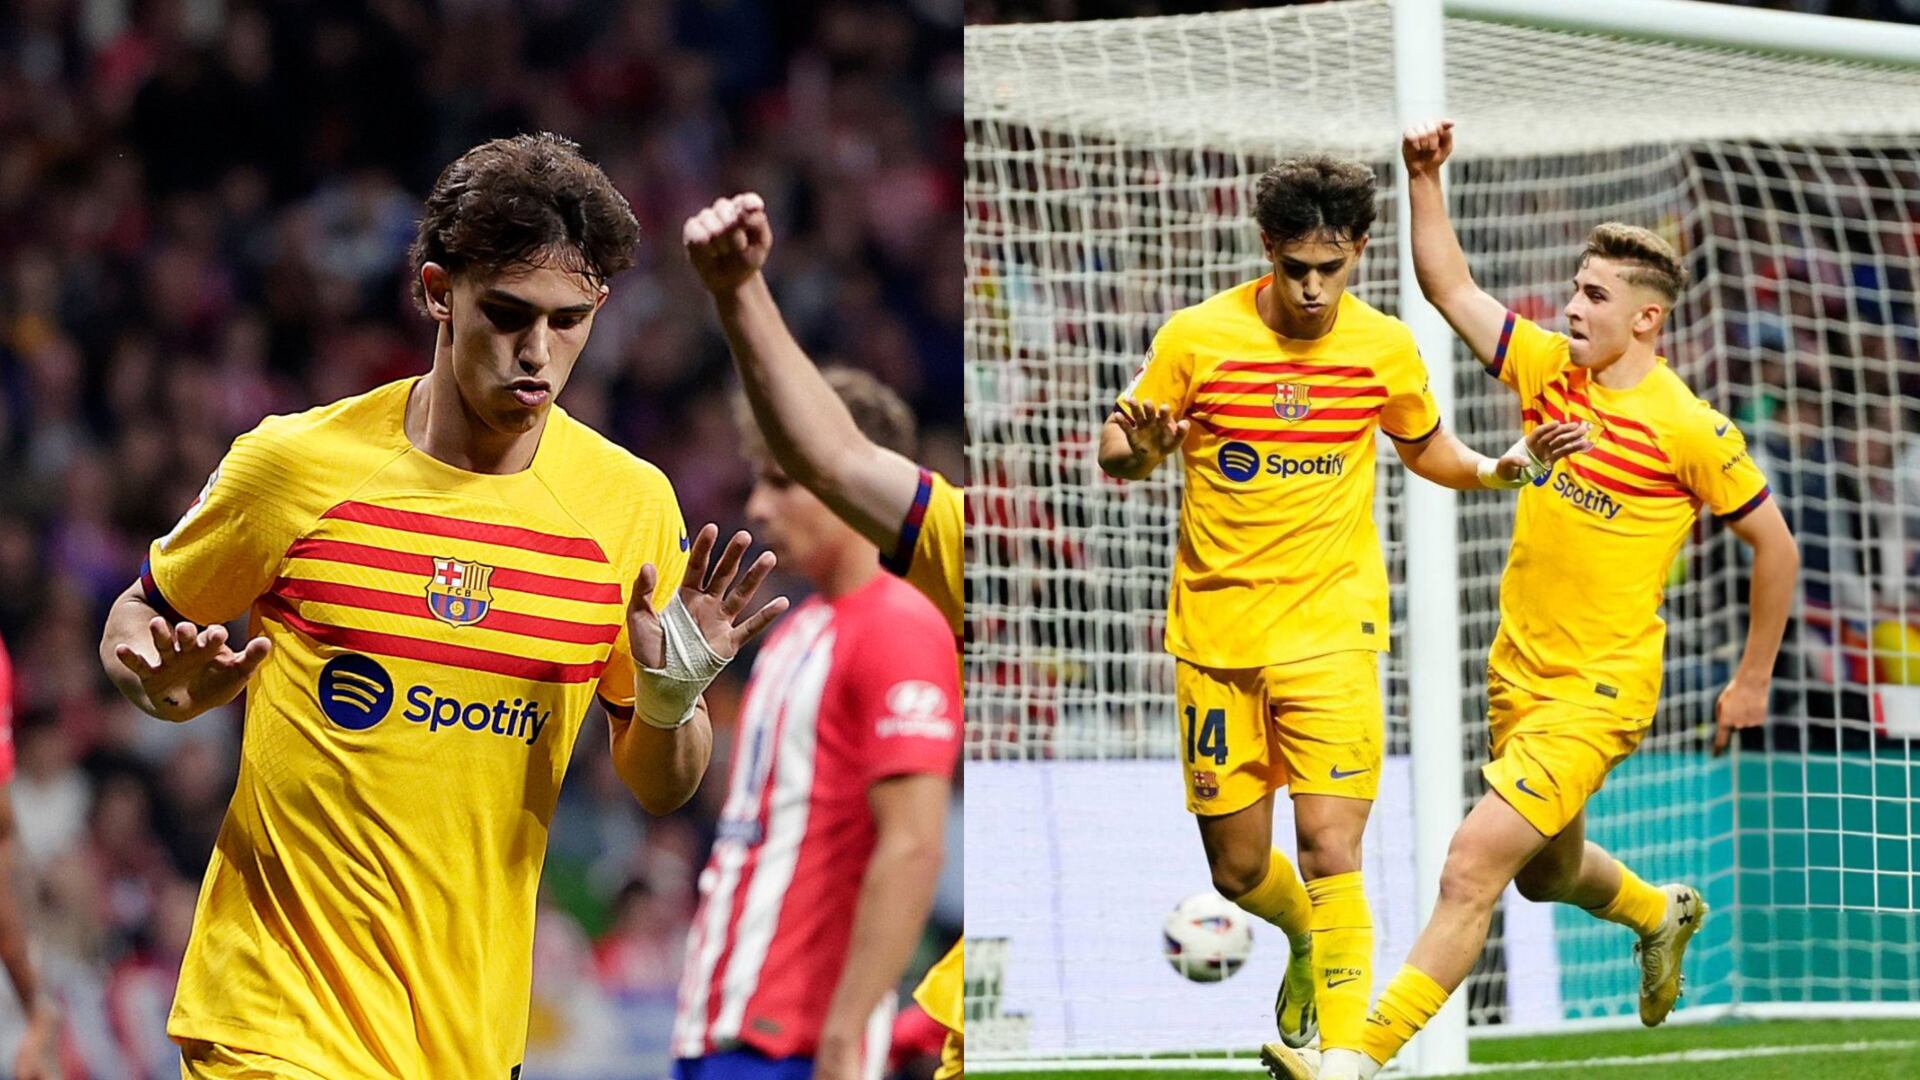 As he scored with FC Barcelona, Joao Felix sends a bold message to Atleti fans